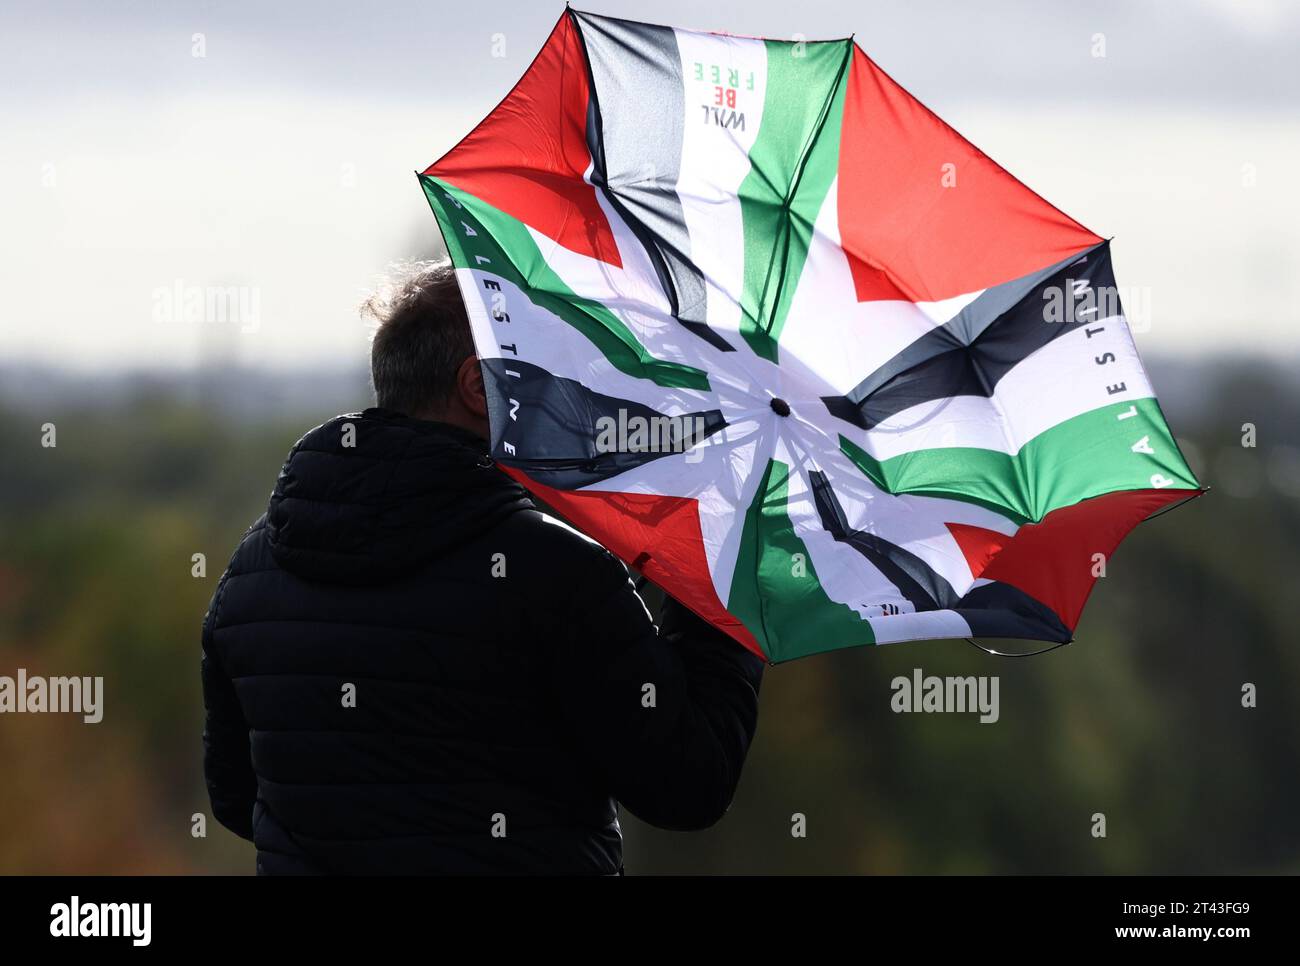 Leicester, Leicestershire, UK. 28th October 2023. A protesters umbrella is turned inside out during a pro-Palestinian demonstration and banner drop near to the base of UAV Tactical Systems. UAV Tactical Systems is an Israeli-French company manufacturing drones sold to the British army, Israel and international arms markets. Credit Darren Staples/Alamy Live News. Stock Photo